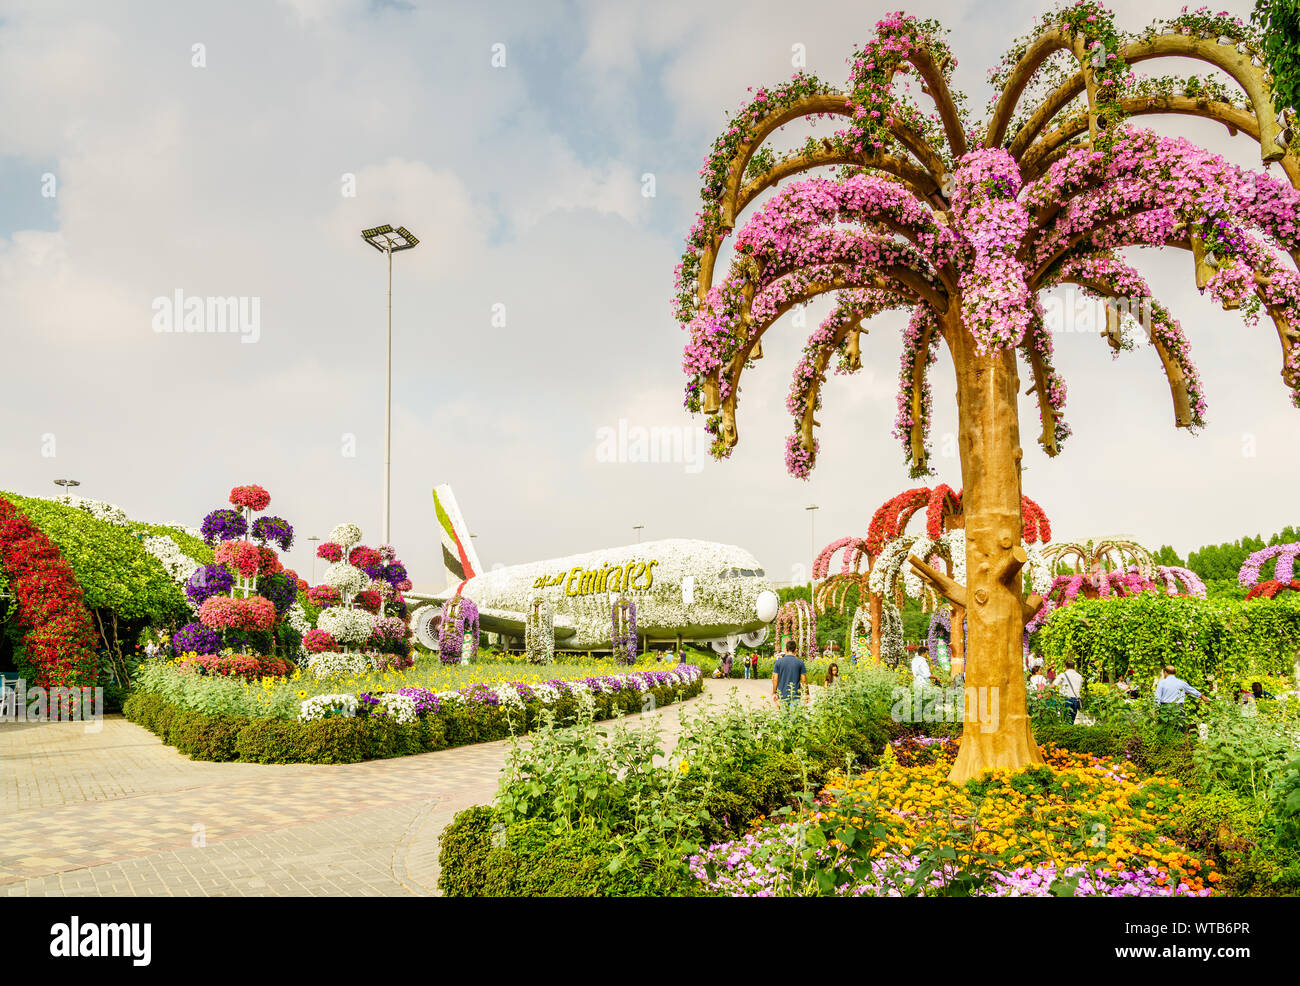 Dubai, UAE, December 22, 2018: Miracle Garden is one of the main tourist attractions in Dubai, UAE Stock Photo